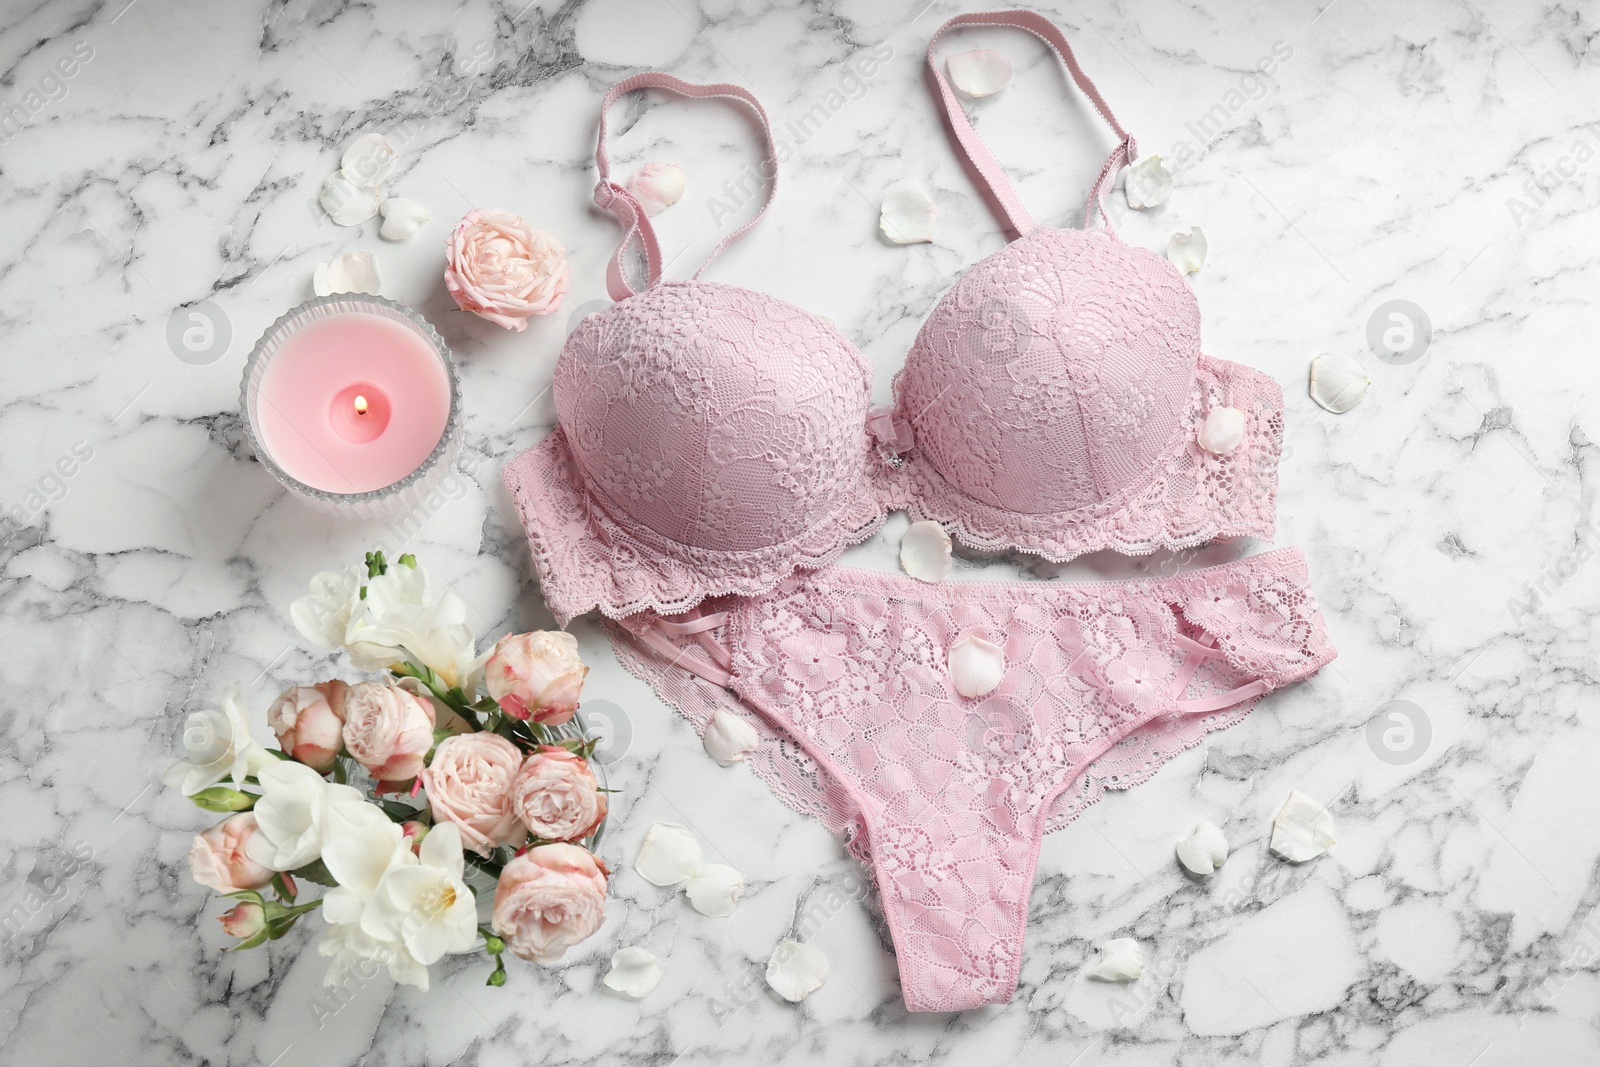 Photo of Flat lay composition with women's underwear on marble background